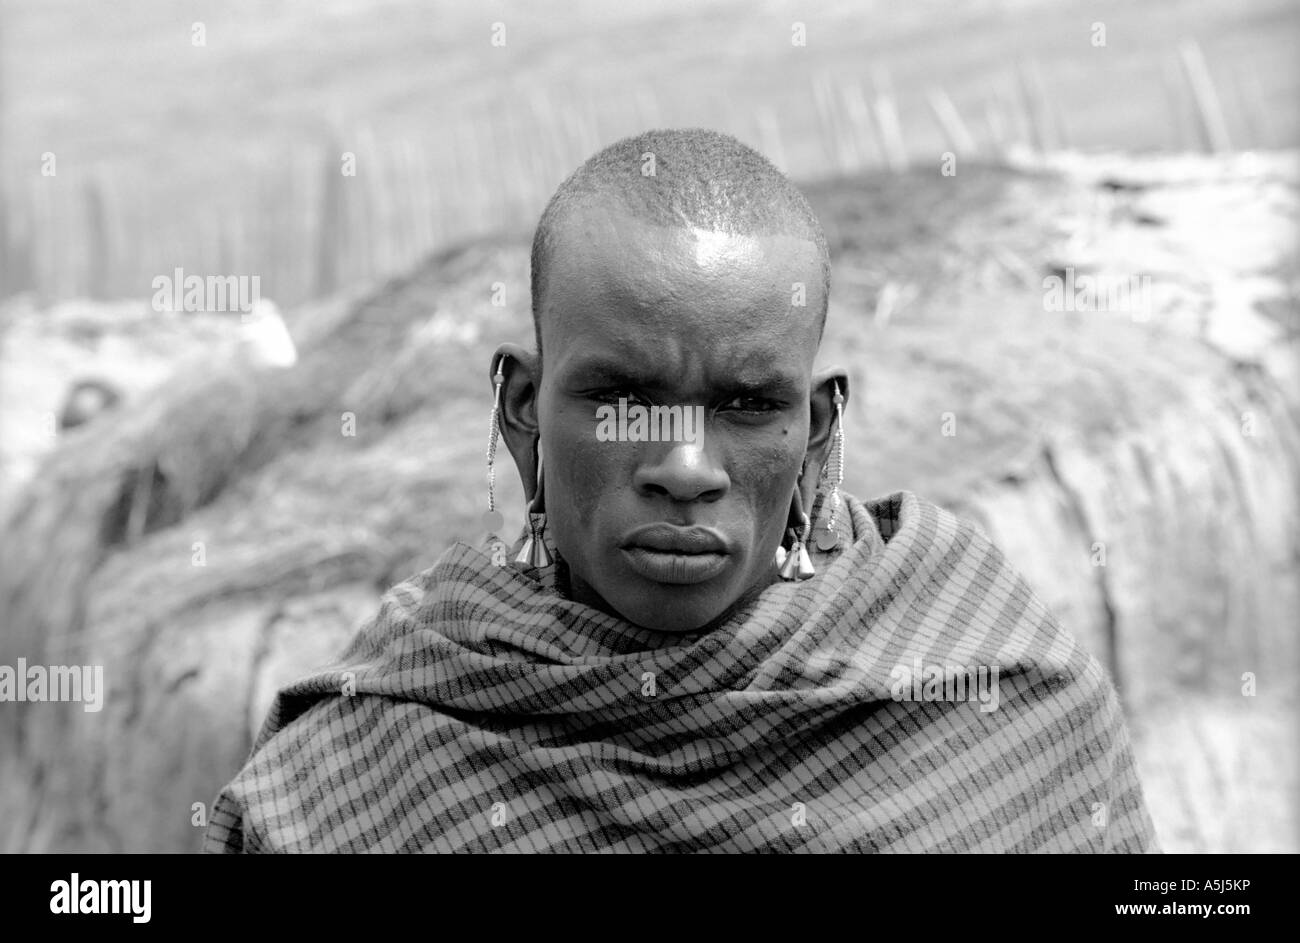 Masai man in traditional dress Black and White Stock Photos & Images ...